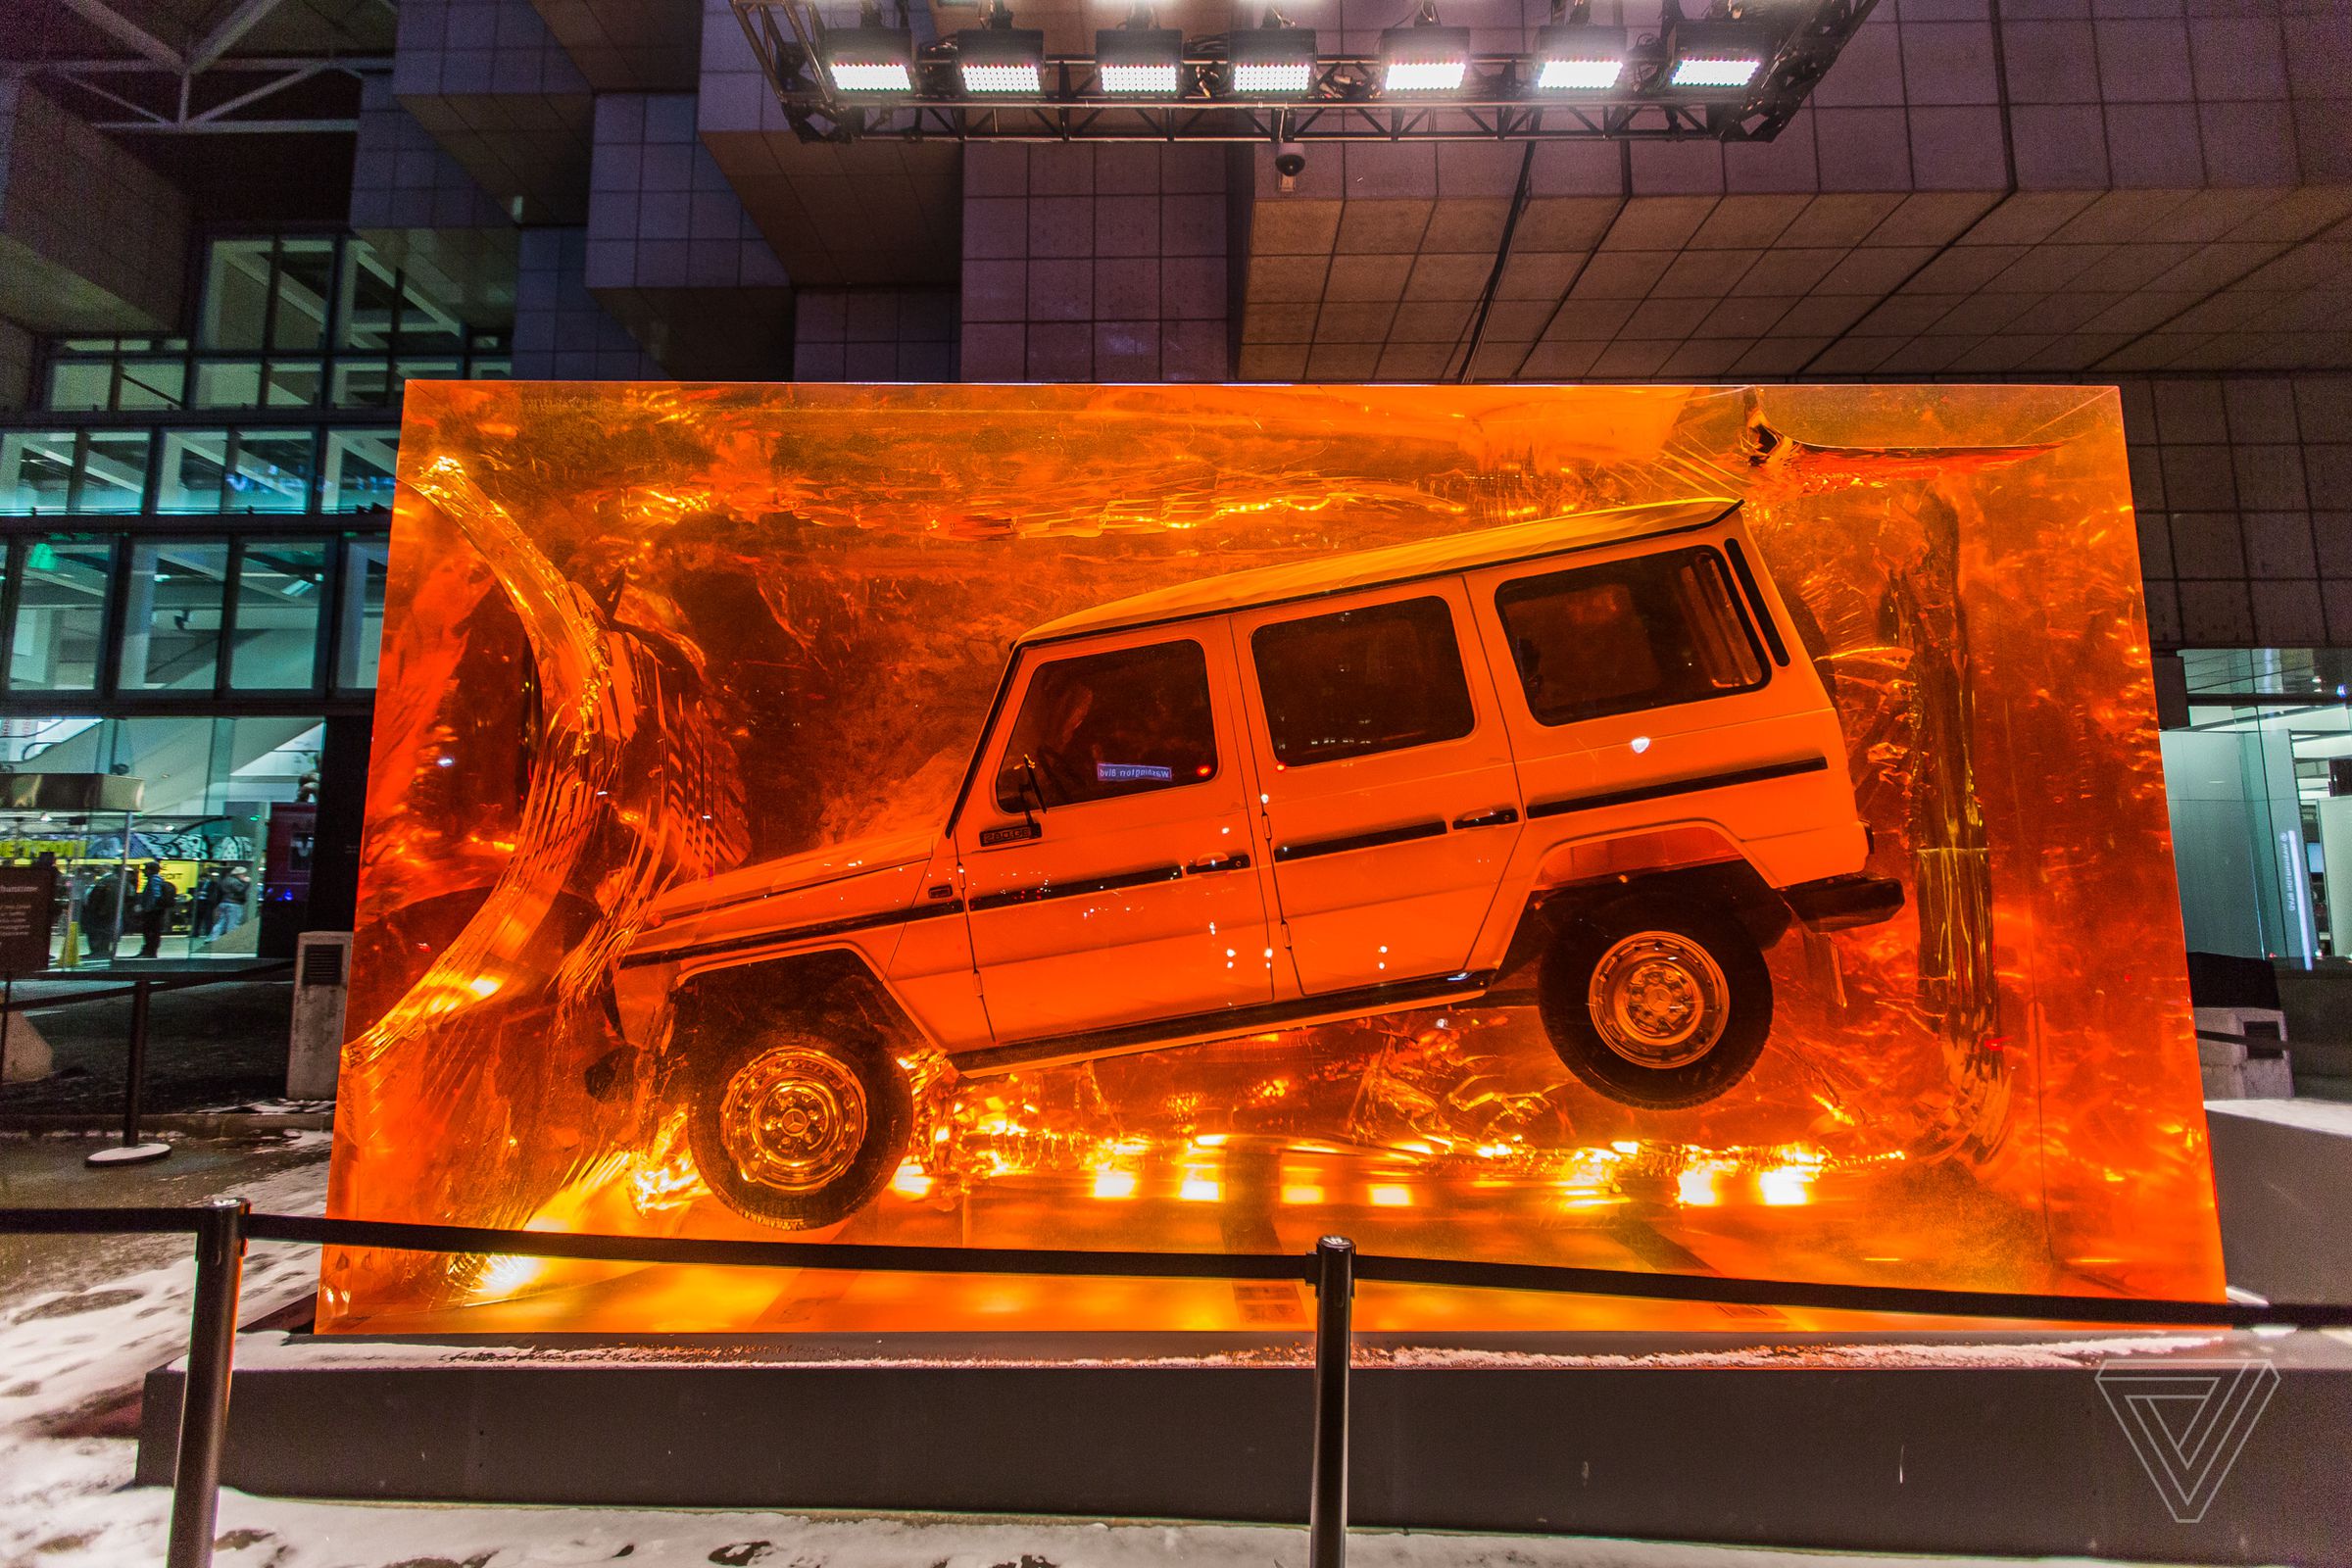 The company also encased an old G-Class in 40,000 liters of resin and placed it outside the Cobo convention center.